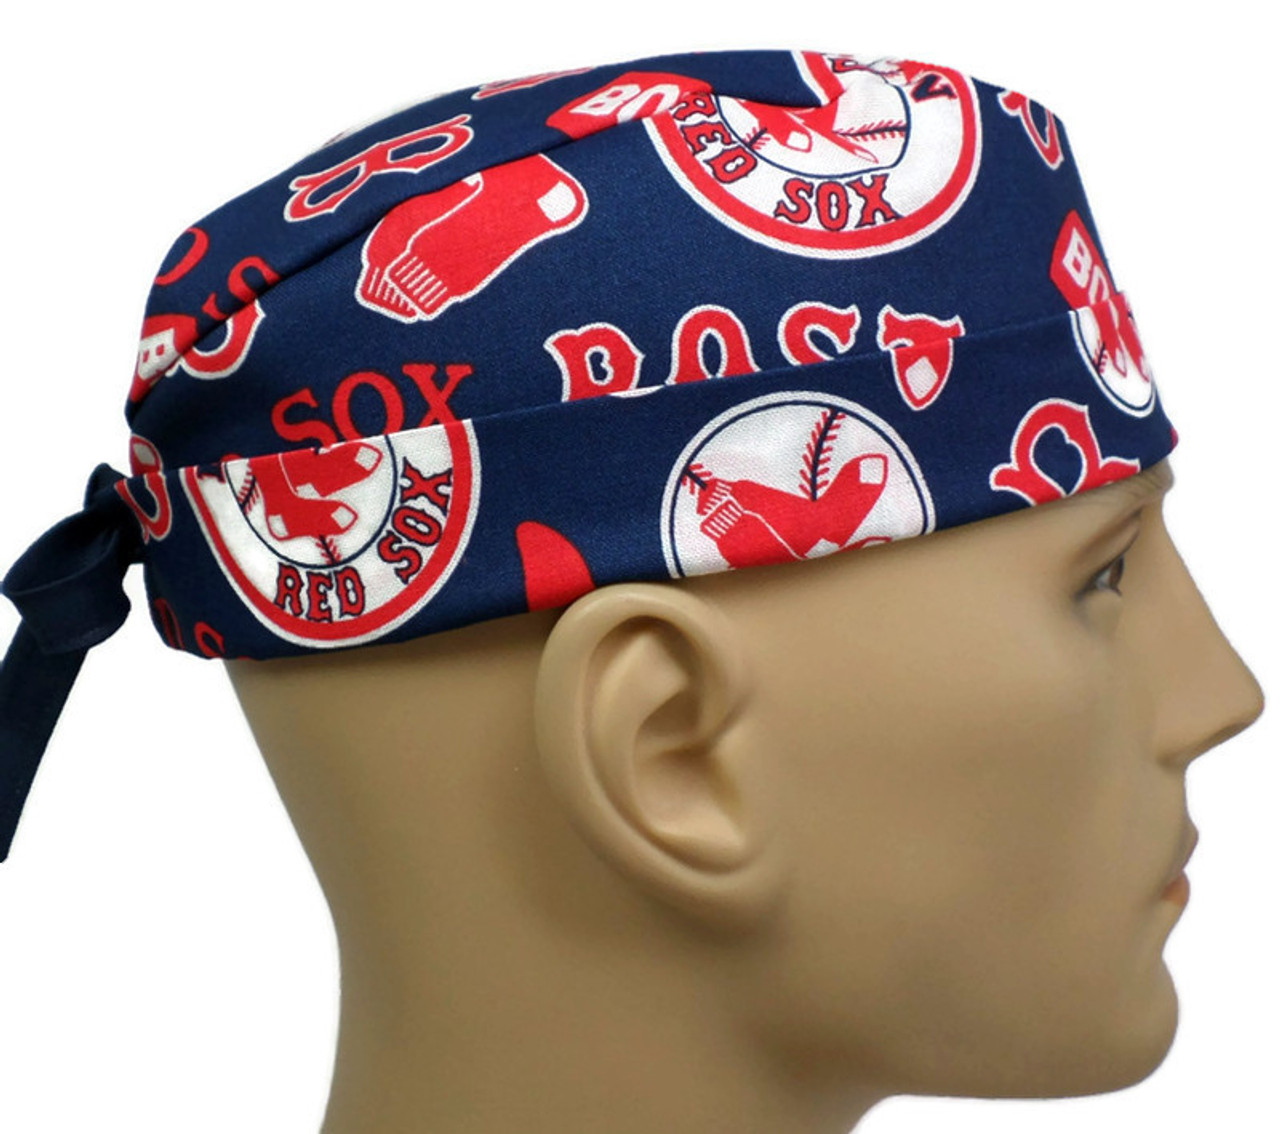 Men's Boston Red Sox Cooperstown Surgical Scrub Hat, Semi-Lined